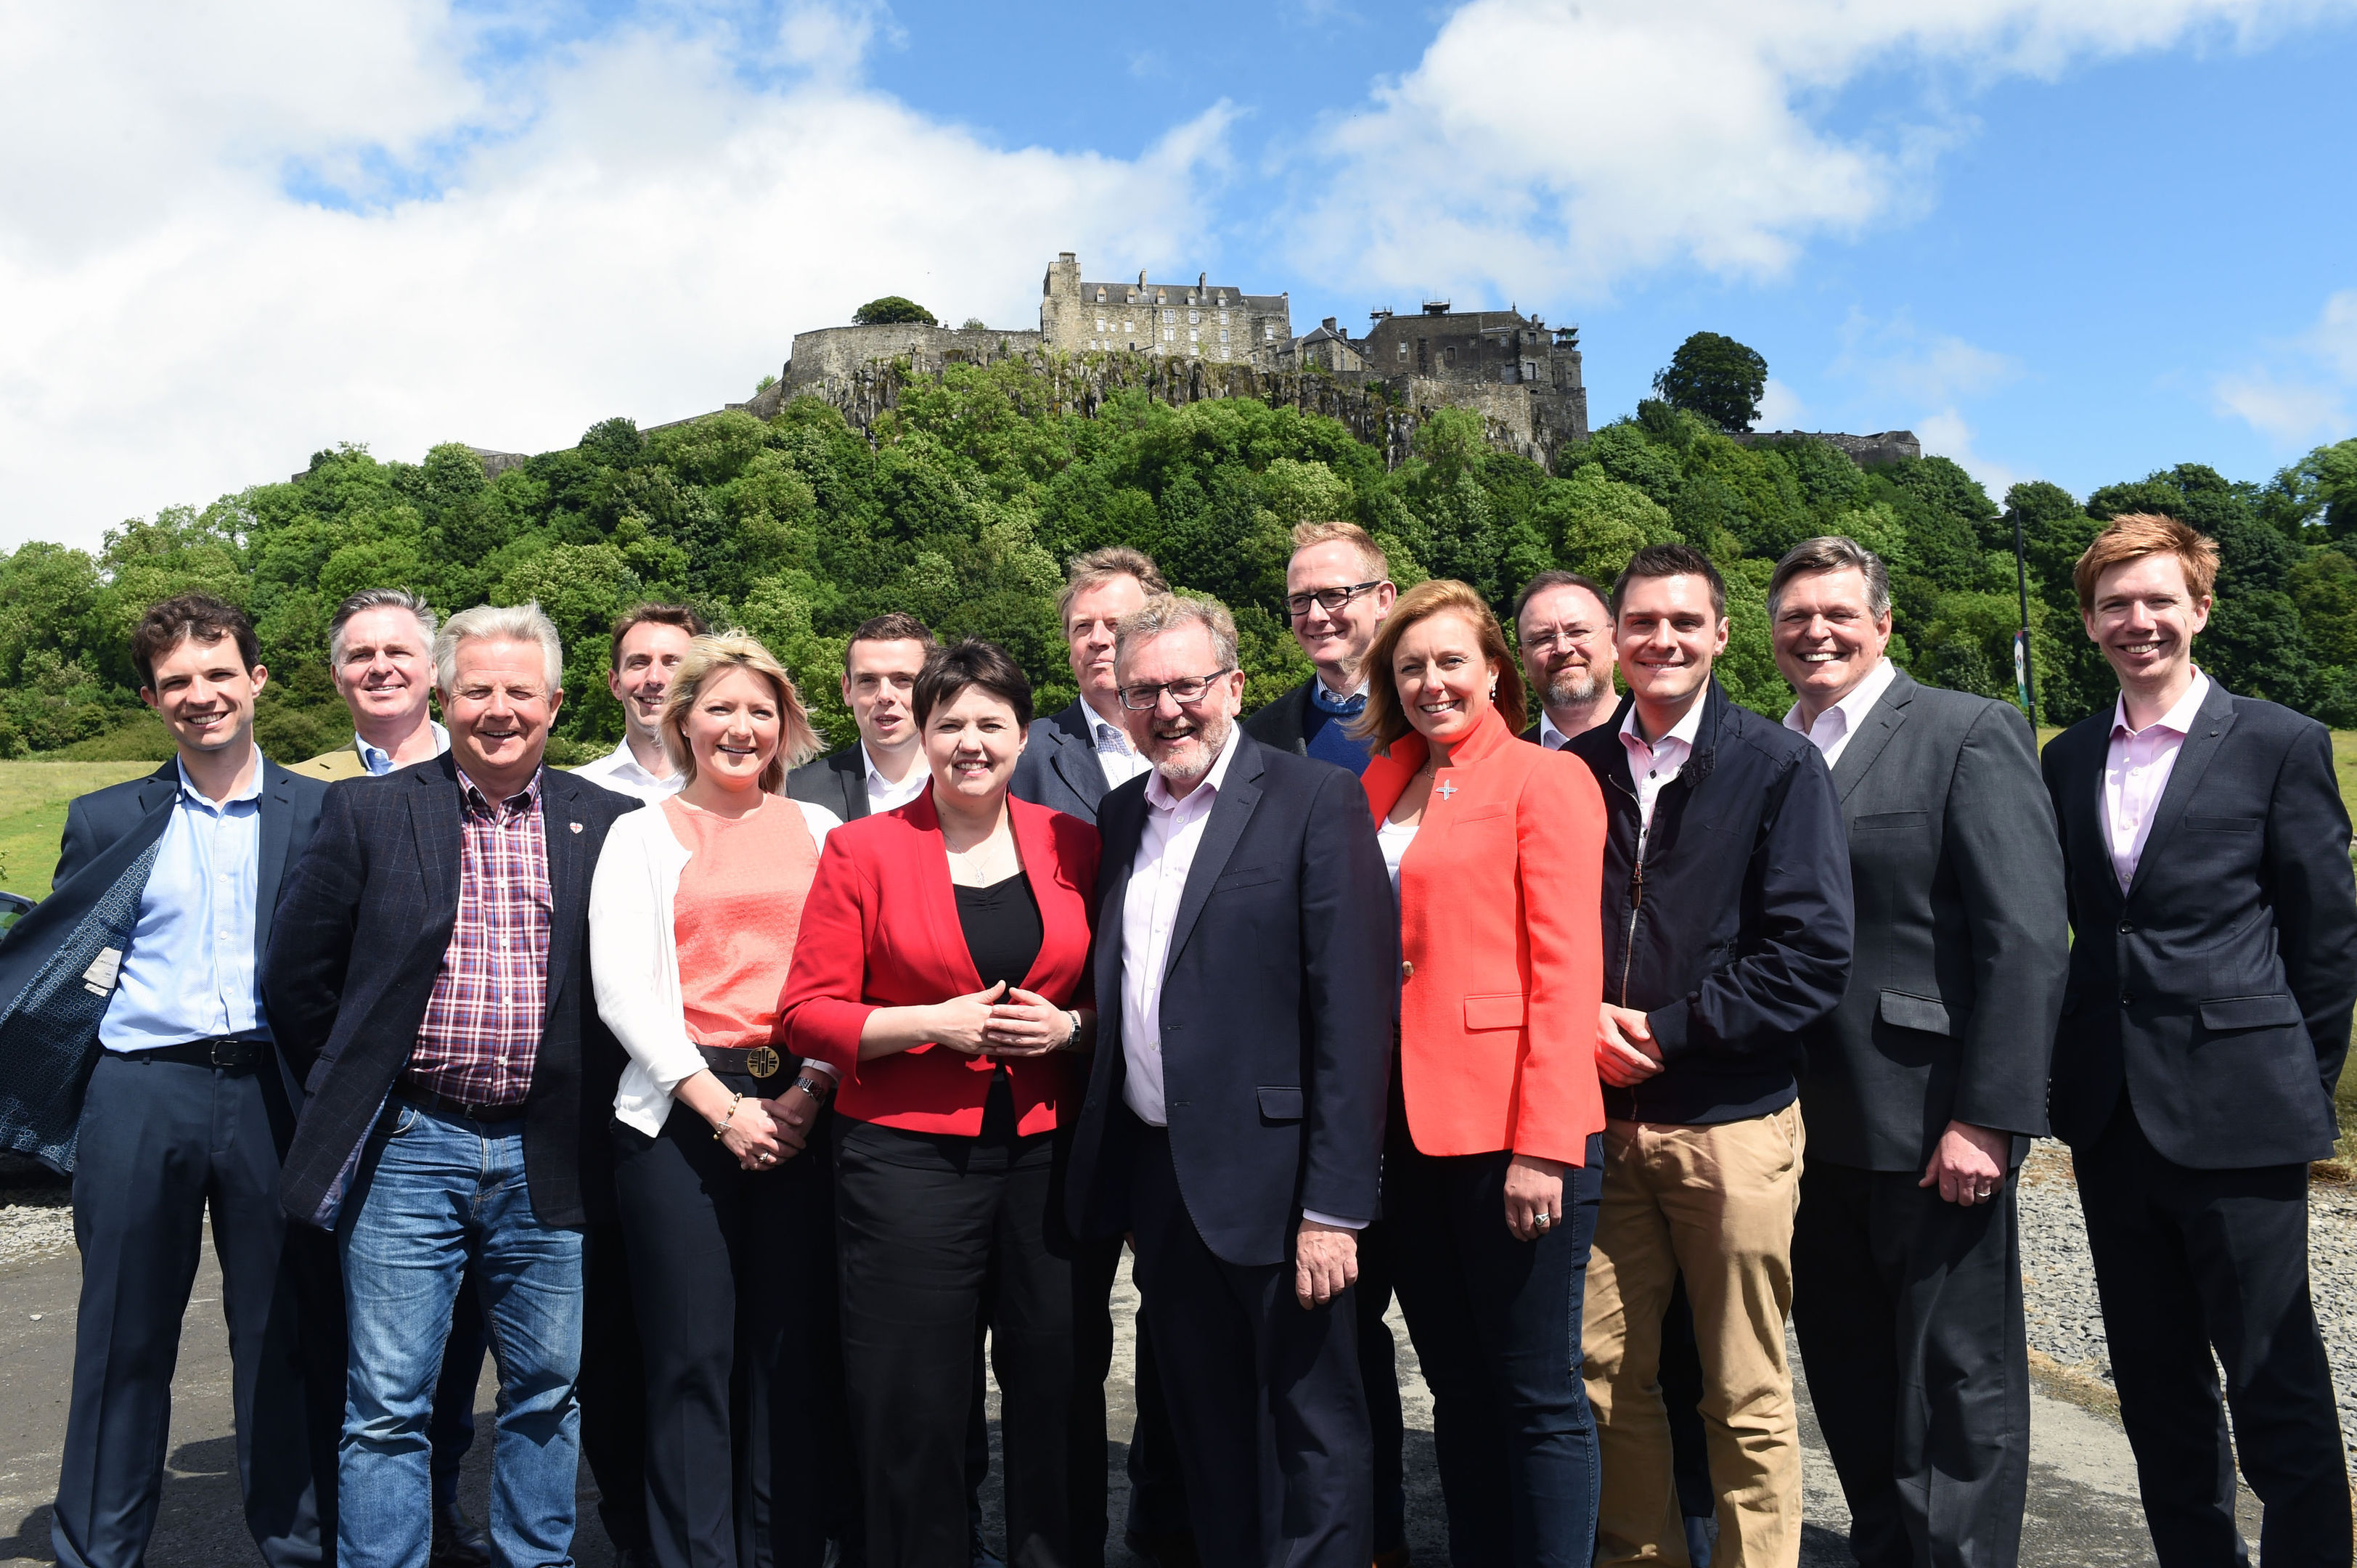 Scottish Conservative leader Ruth Davidson at a photo call with the party's newly-elected members of parliament in front of Stirling Castle.